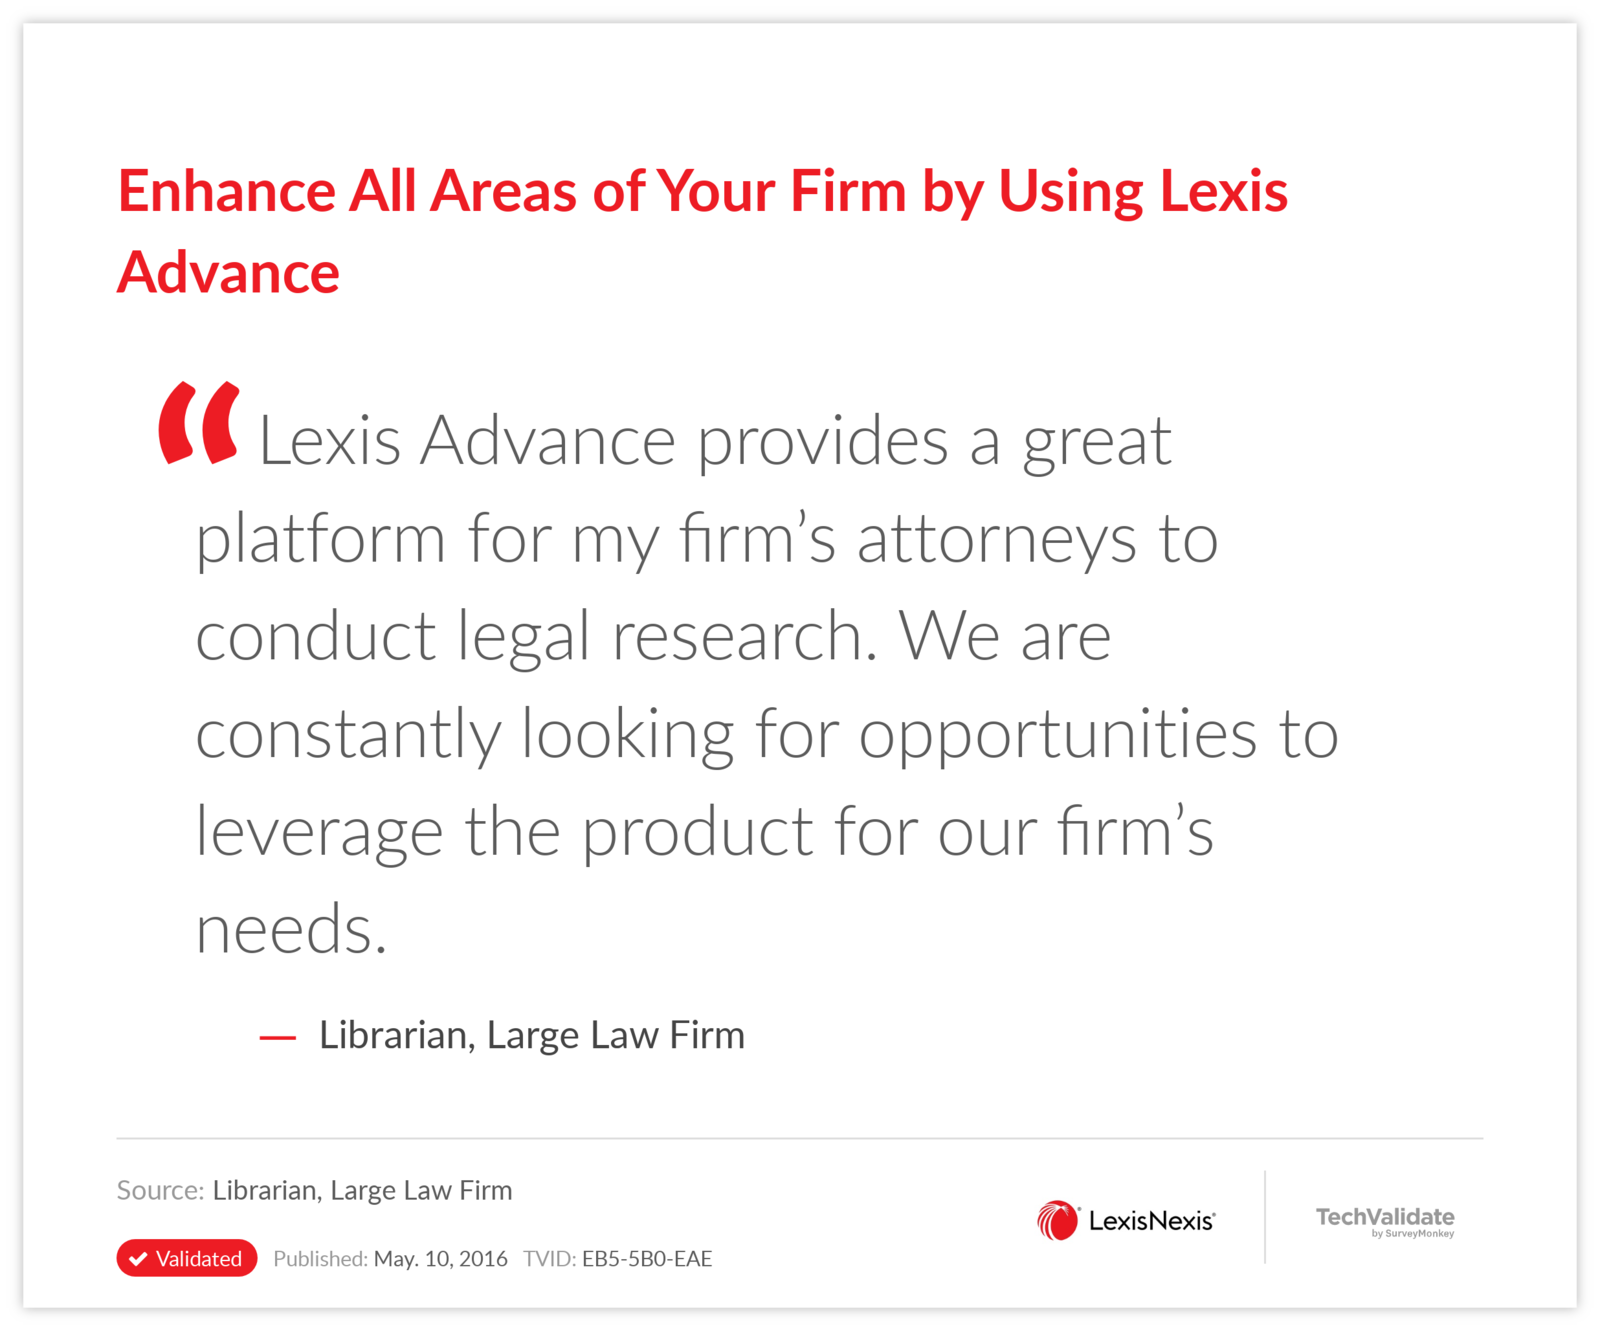 Enhance All Areas of Your Firm by Using Lexis Advance